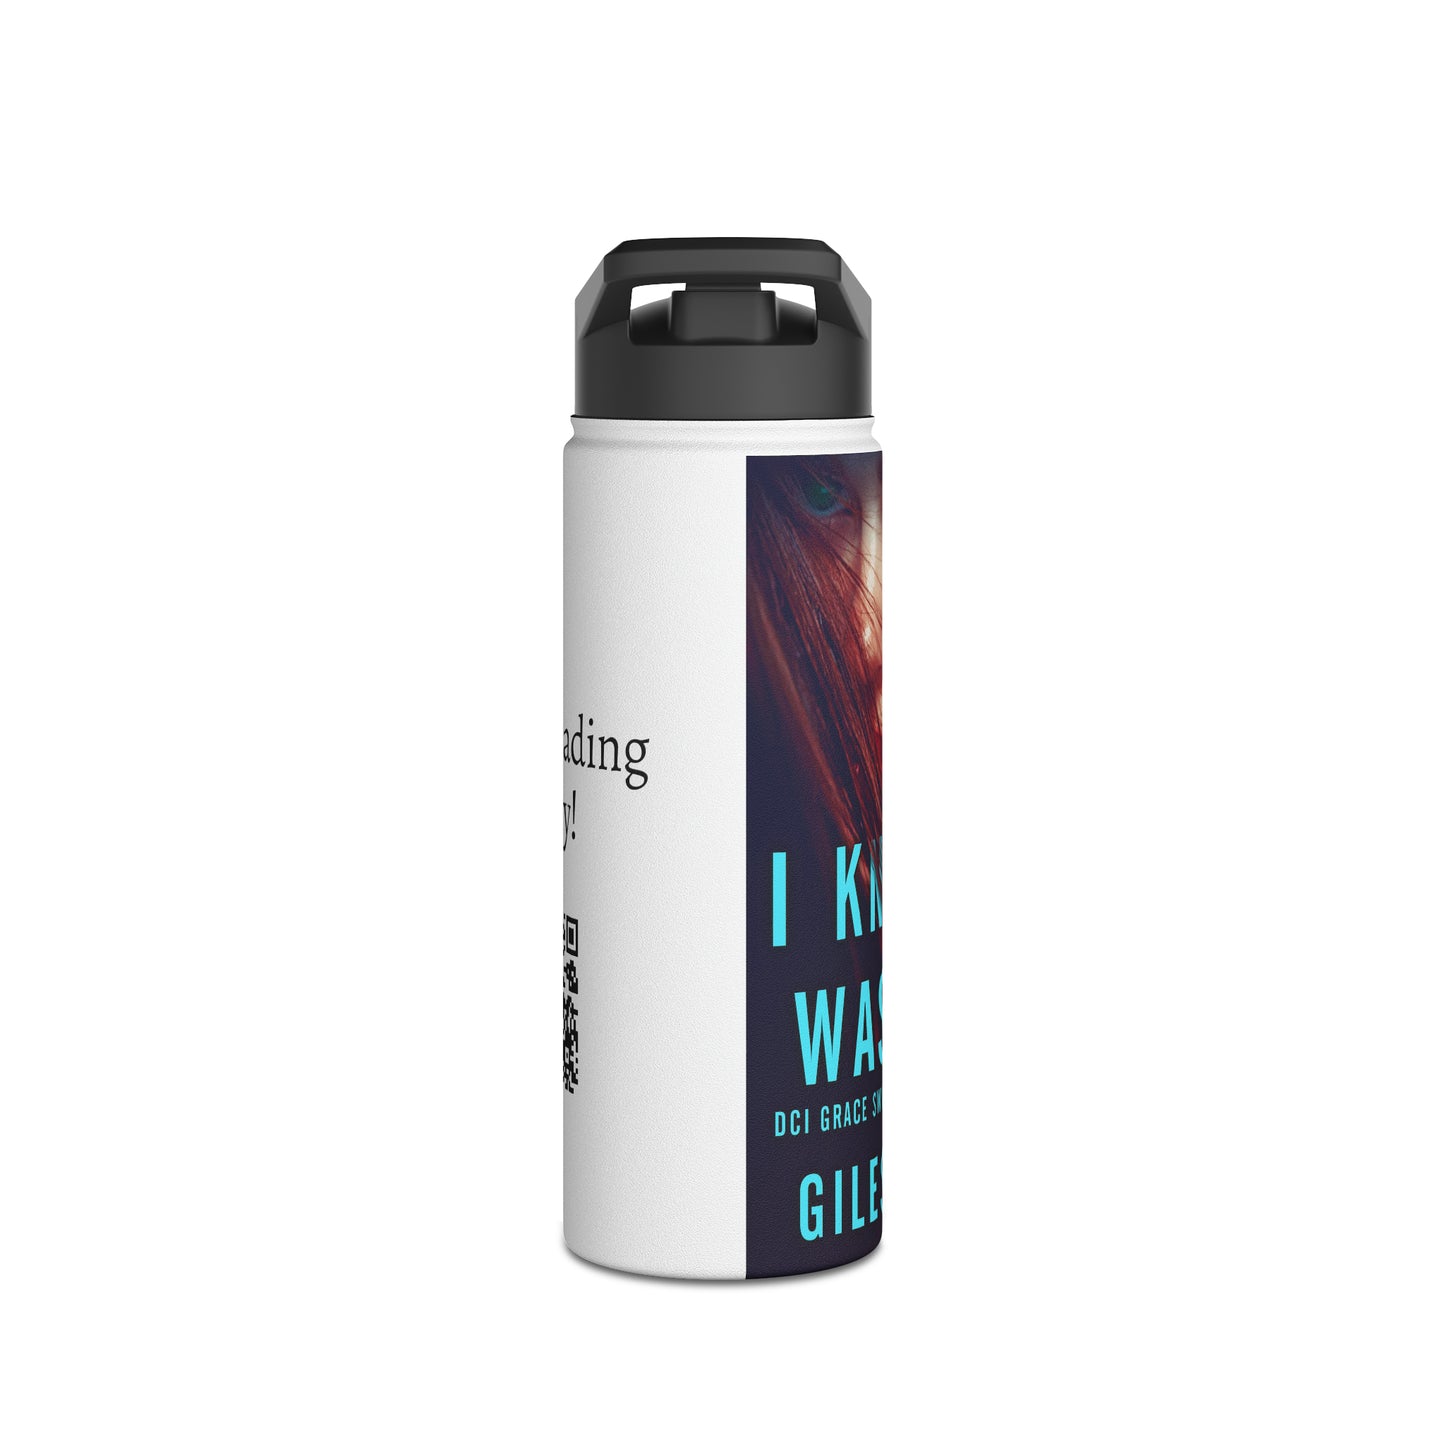 I Know It Was You - Stainless Steel Water Bottle